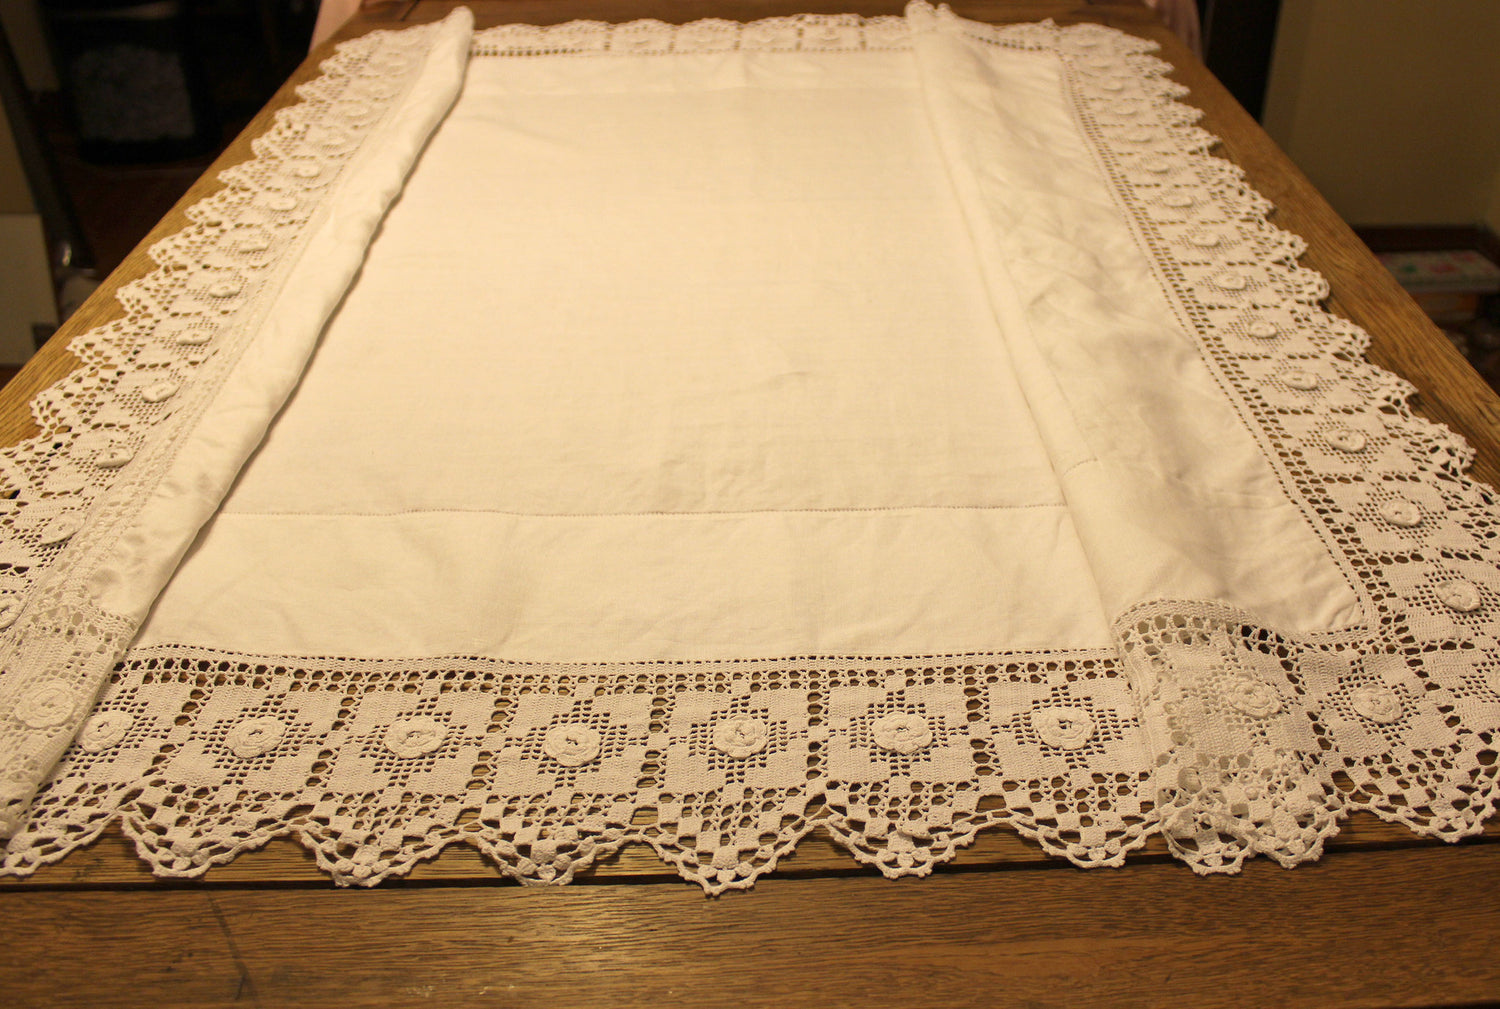 Natural Linen Lace Luncheon Cloth